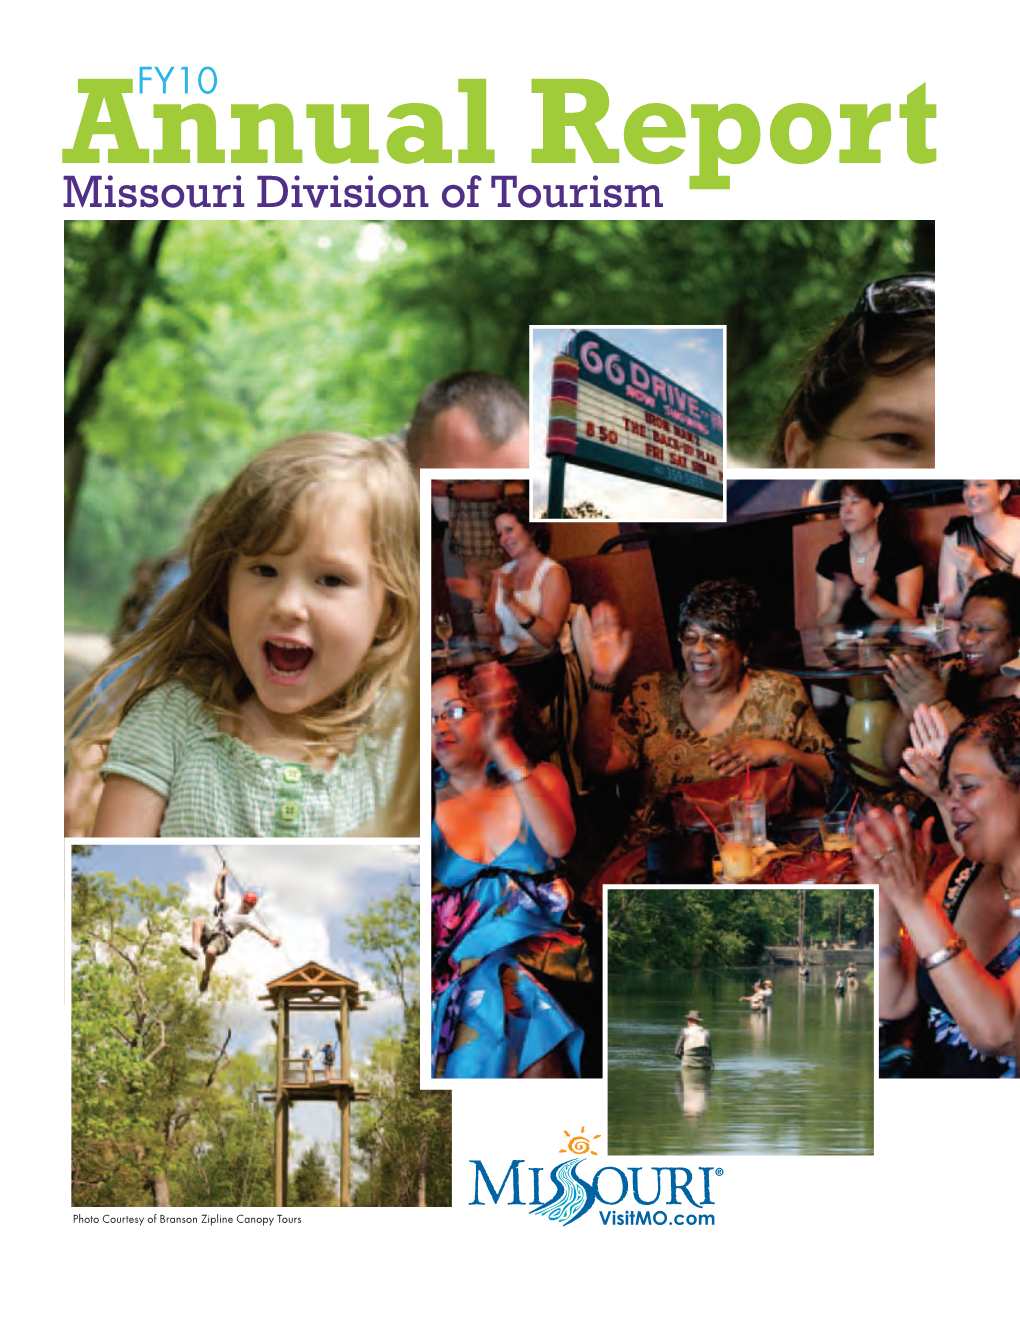 Missouri Division of Tourism Proudly Submits Creation, Which Translates Into More the 2010 Annual Report